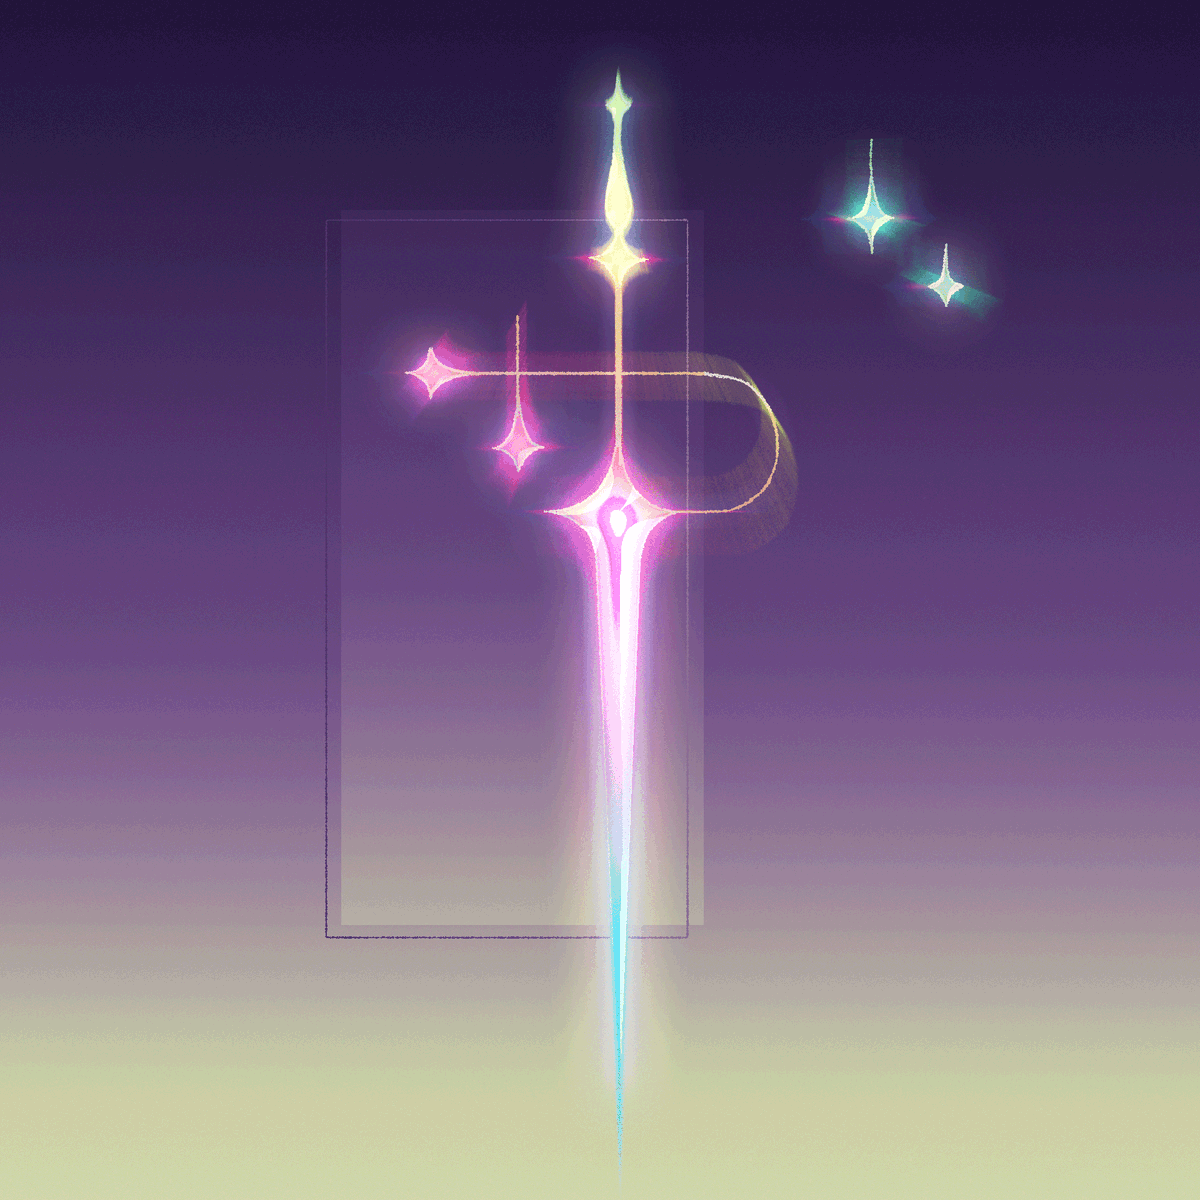  #swordtember 21 - glowing. crazy how many adjustment/effects layers you can stack on top of each other uh